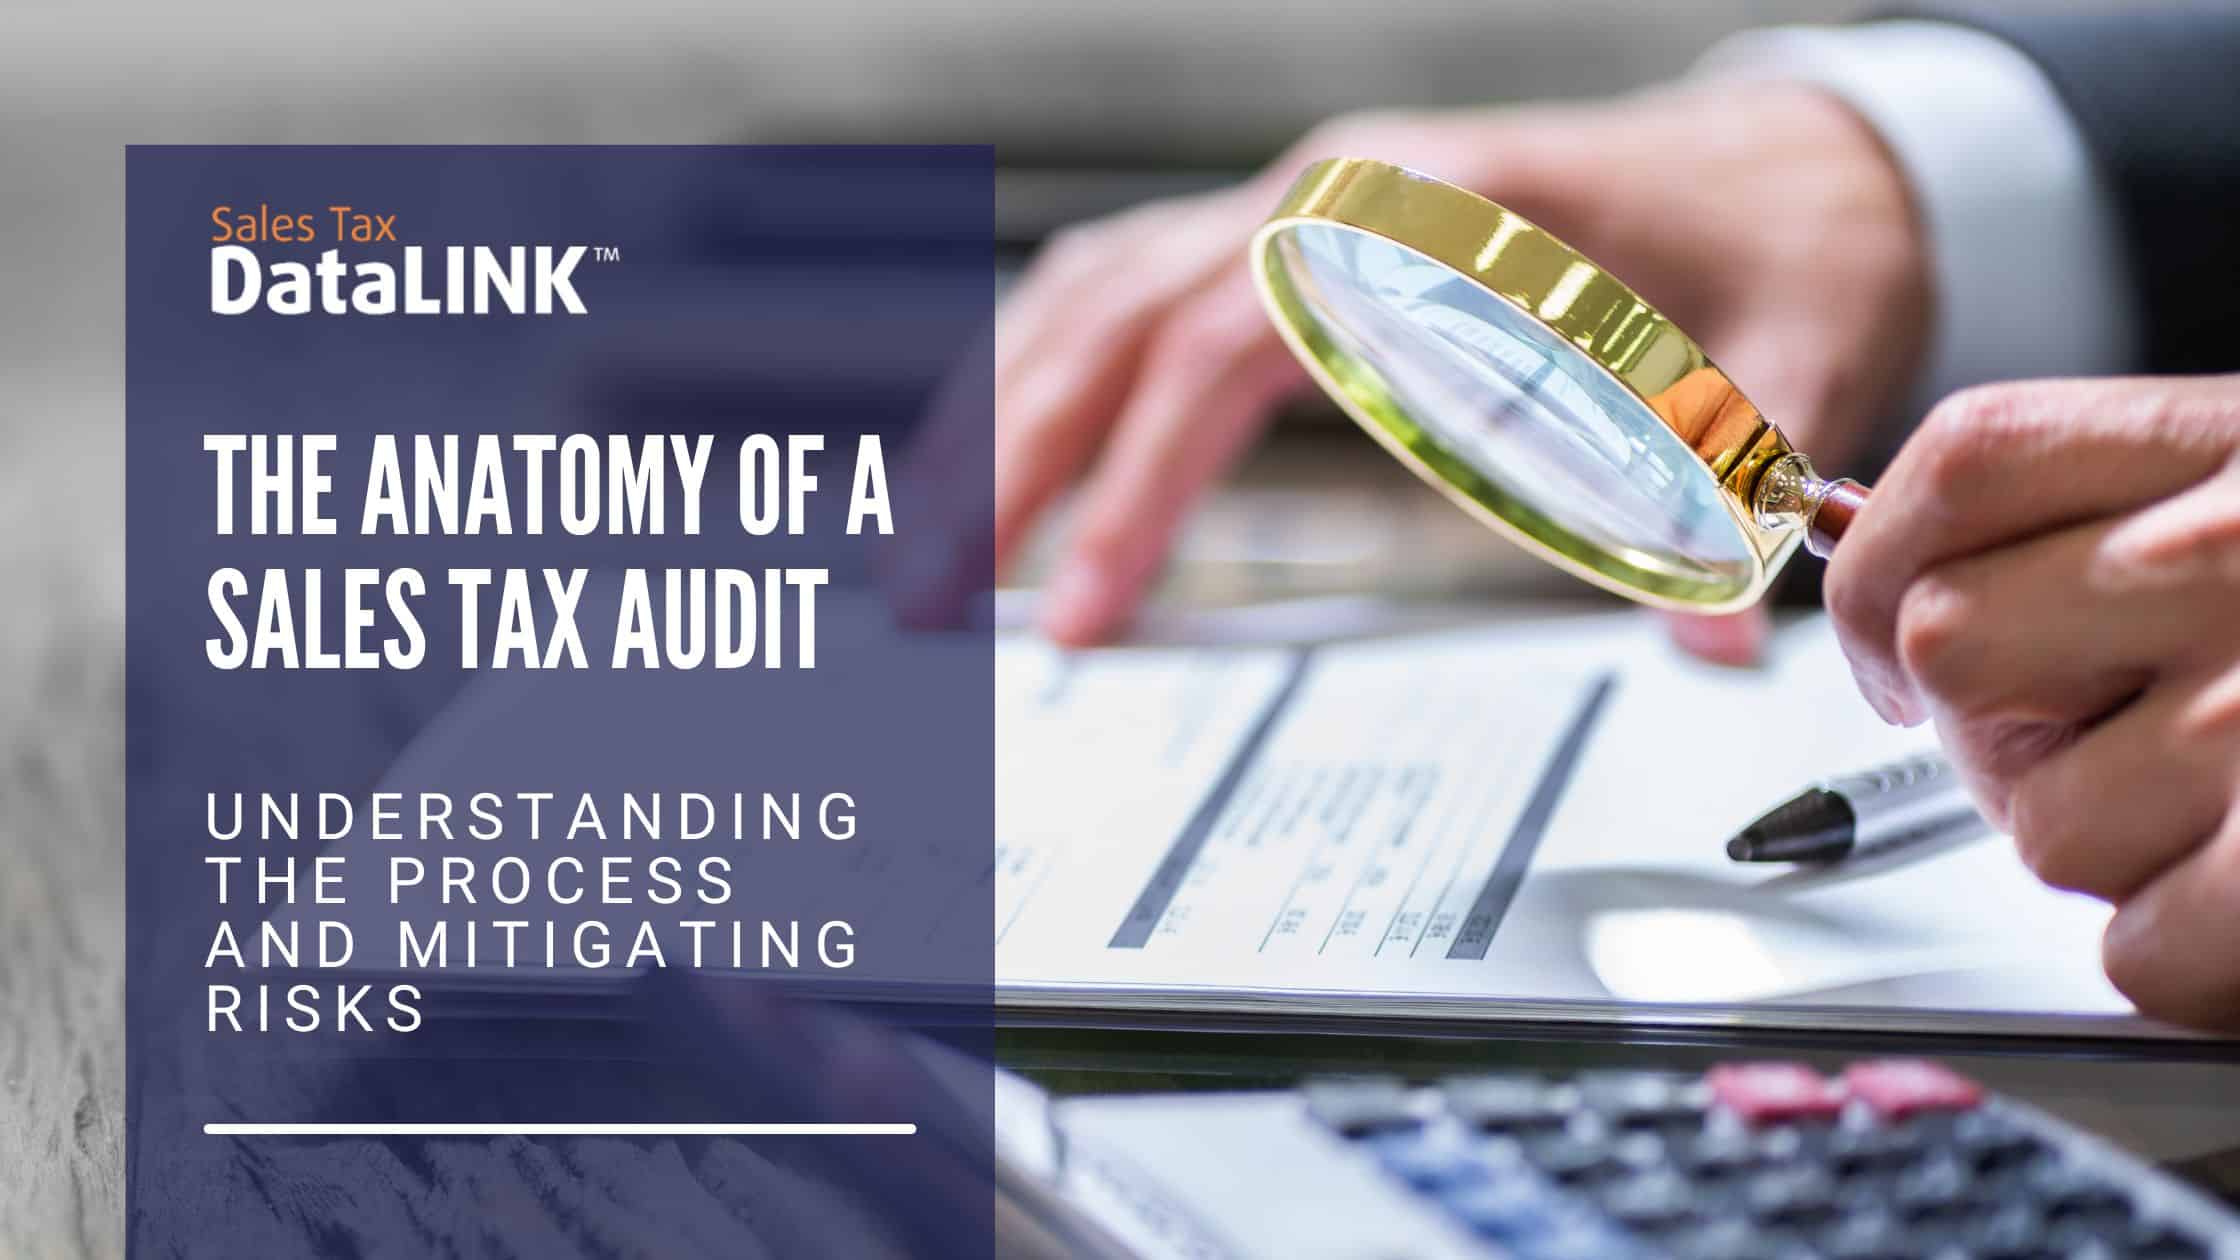 The Anatomy of a Sales Tax Audit: Understanding the Process and Mitigating Risks